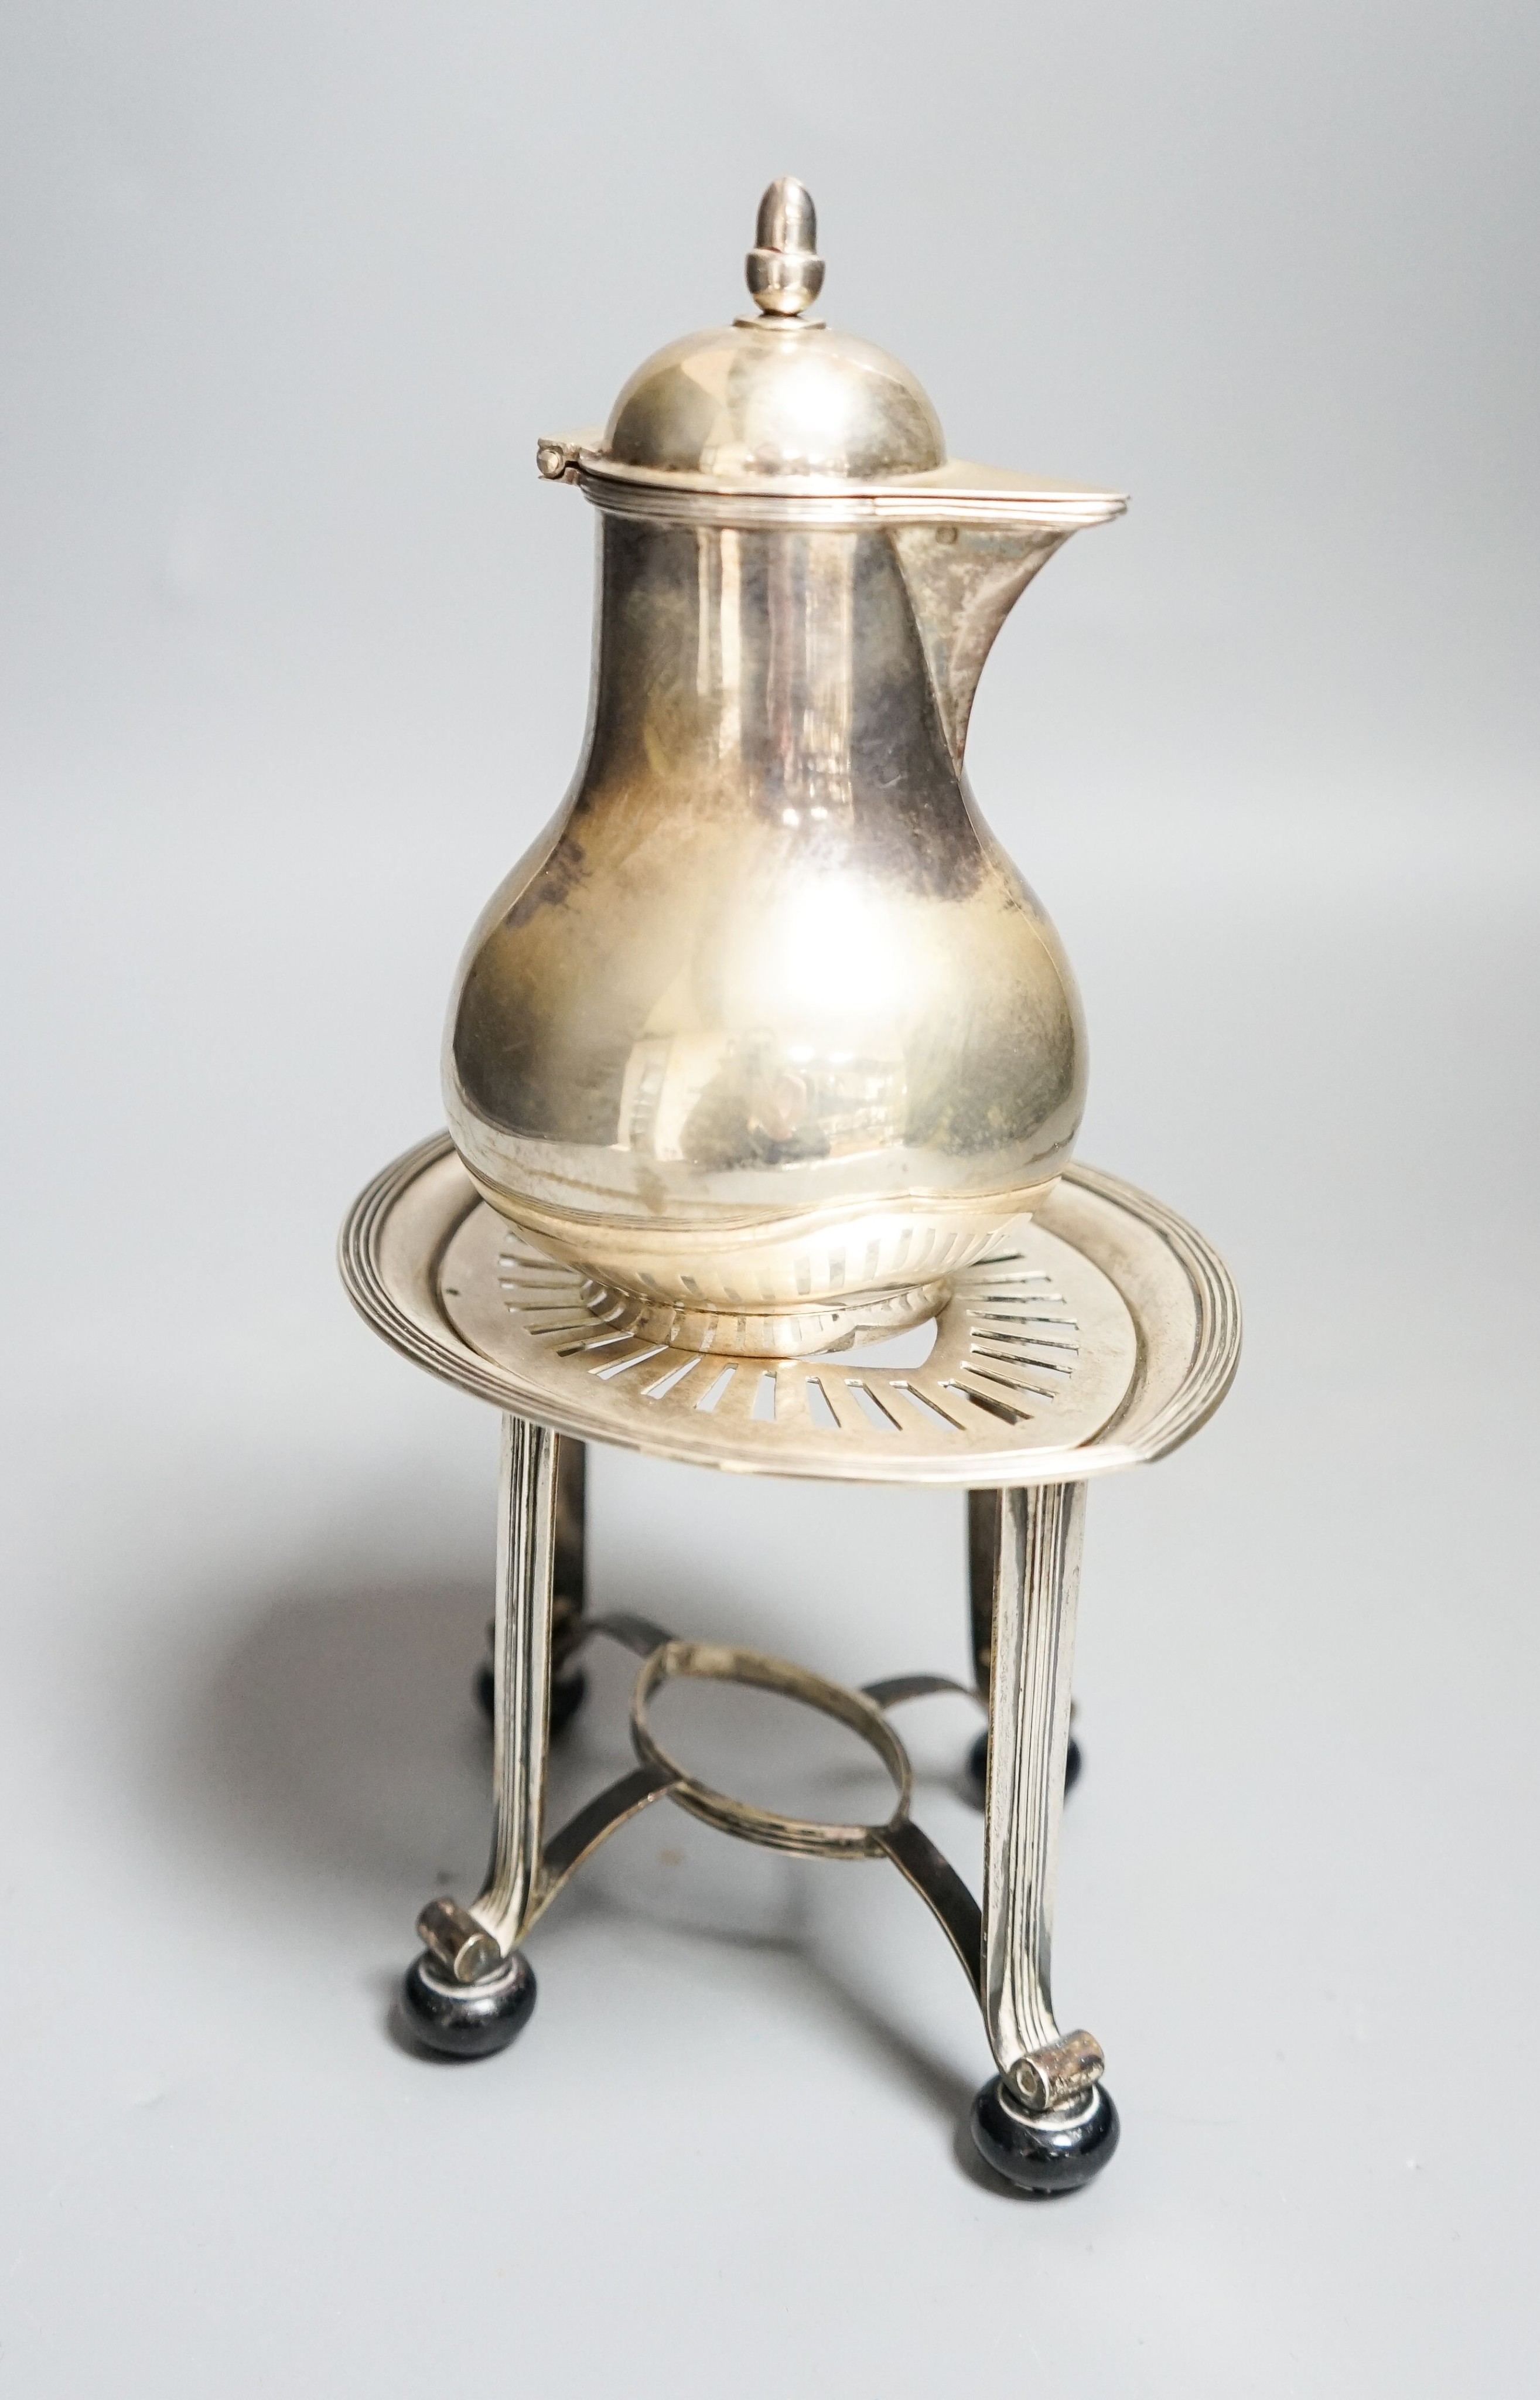 A Dutch white metal cafe-au-lait pot, with hinged cover, acorn finial and wooden handle, height 13cm, together with a Dutch white metal stand, gross 9.5oz.